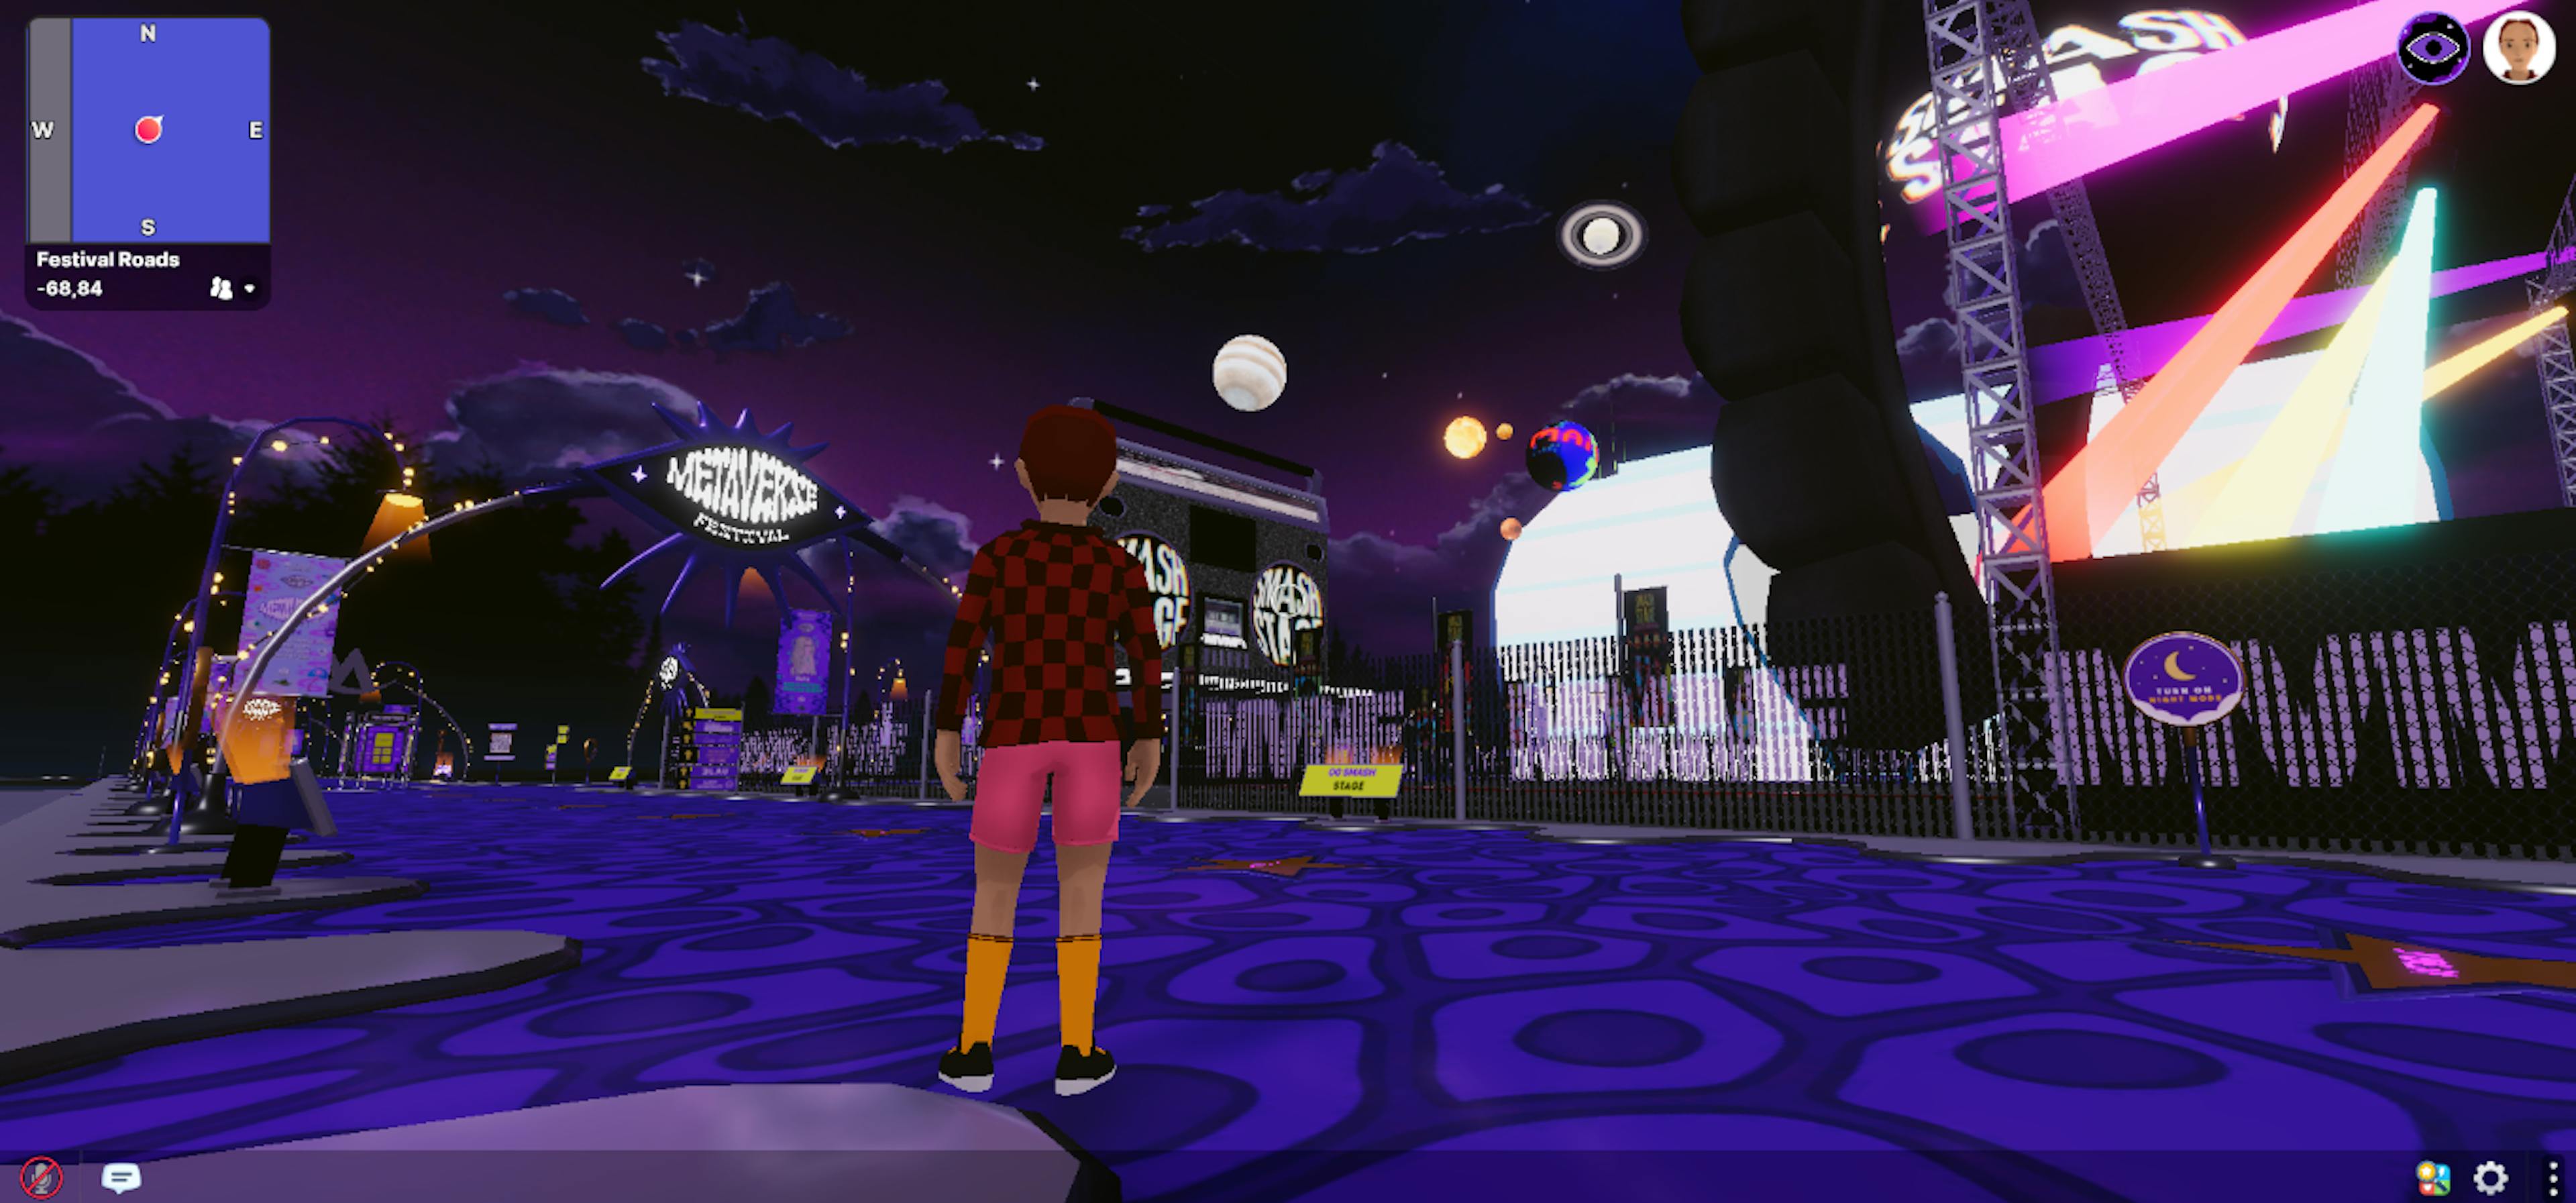 Walking to The Metaverse Festival in Decentraland to watch Dana Immanuel & The Stolen Band perform